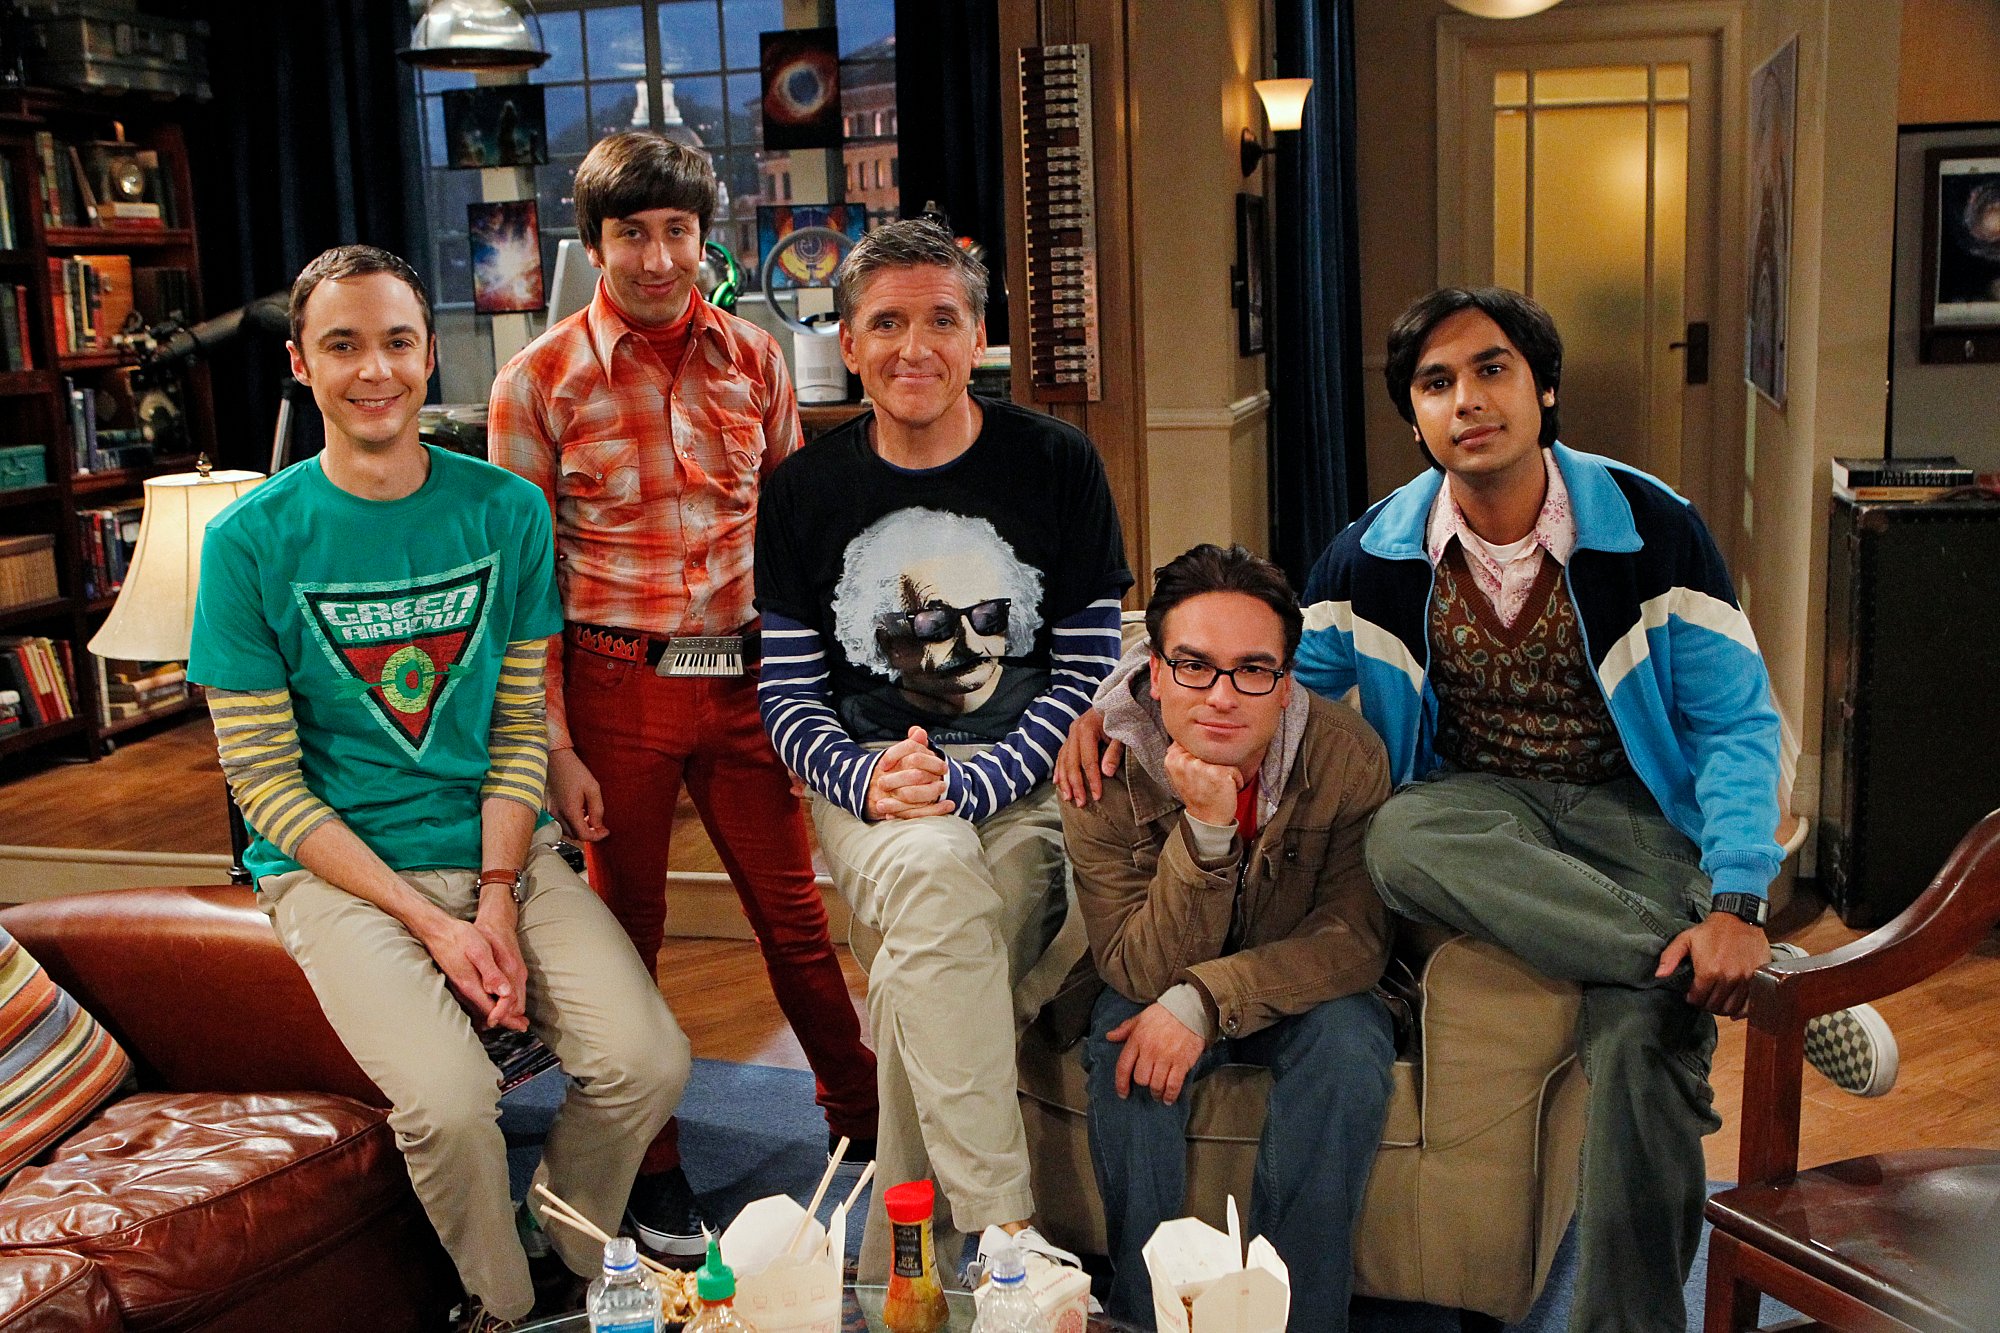 The cast of 'The Big Bang Theory' appear on 'The Late Late Show with Craig Ferguson'